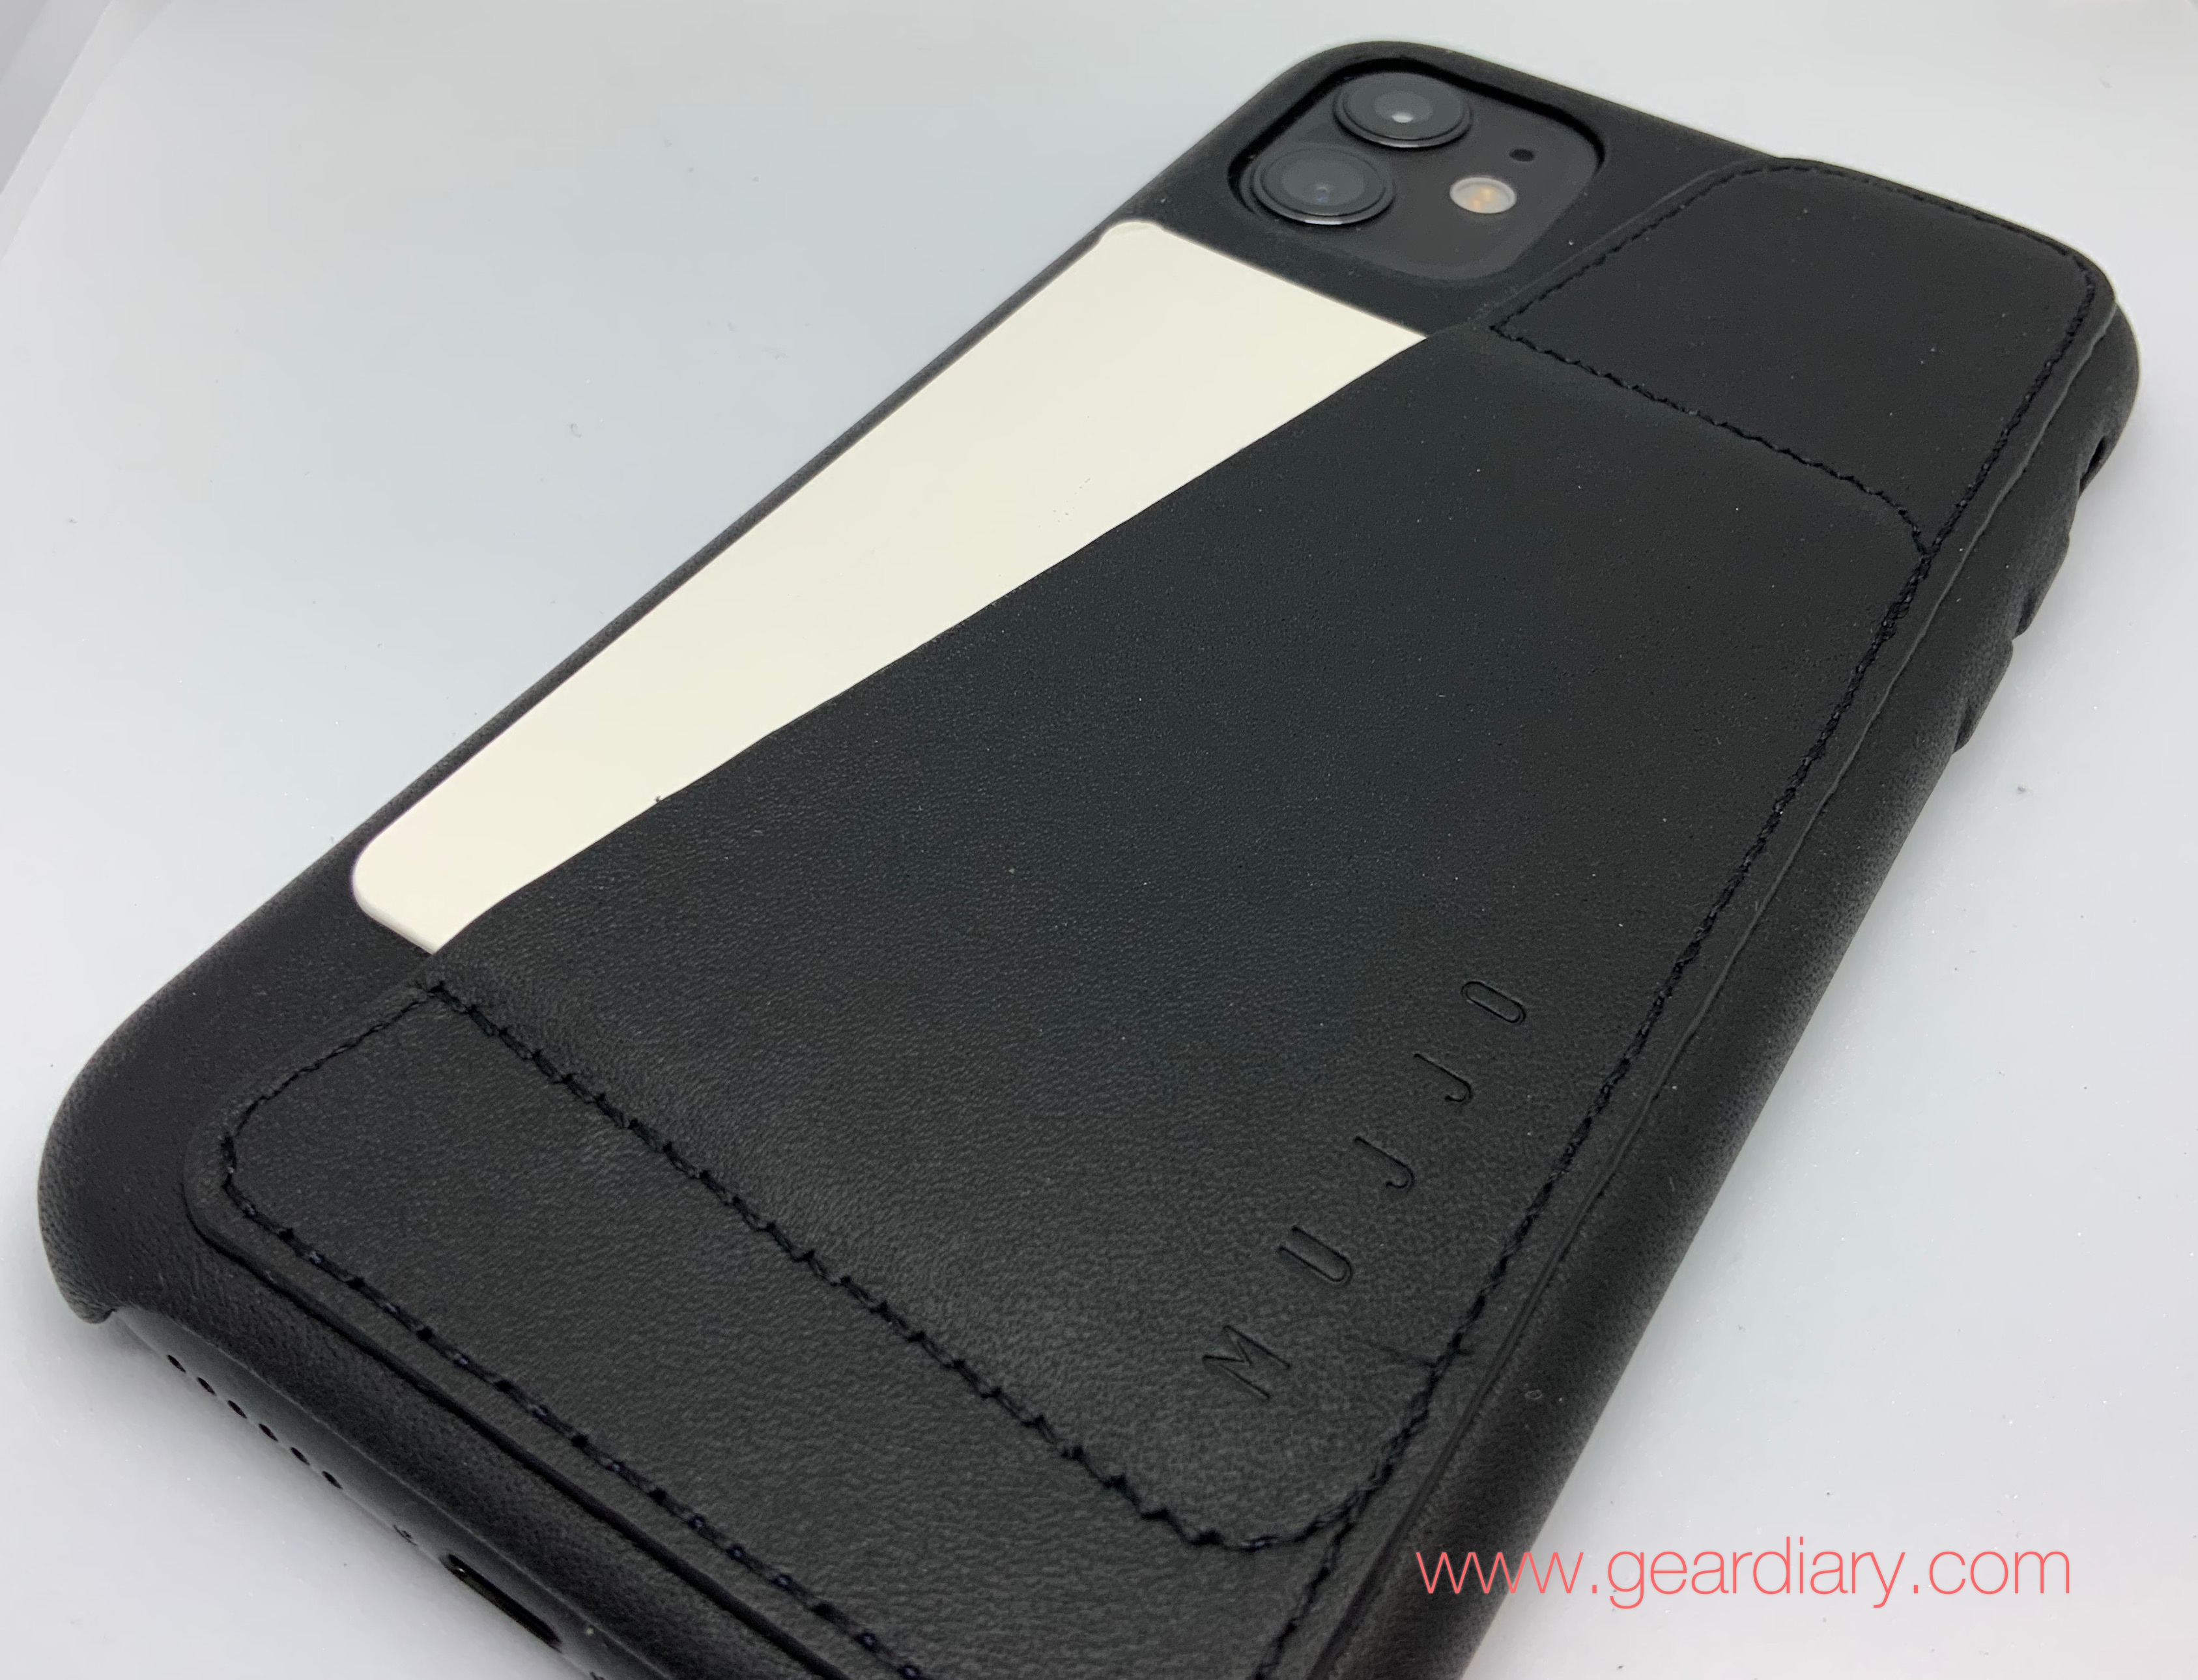 Review: Mujjo Full Leather Wallet Case For iPhone XS Max